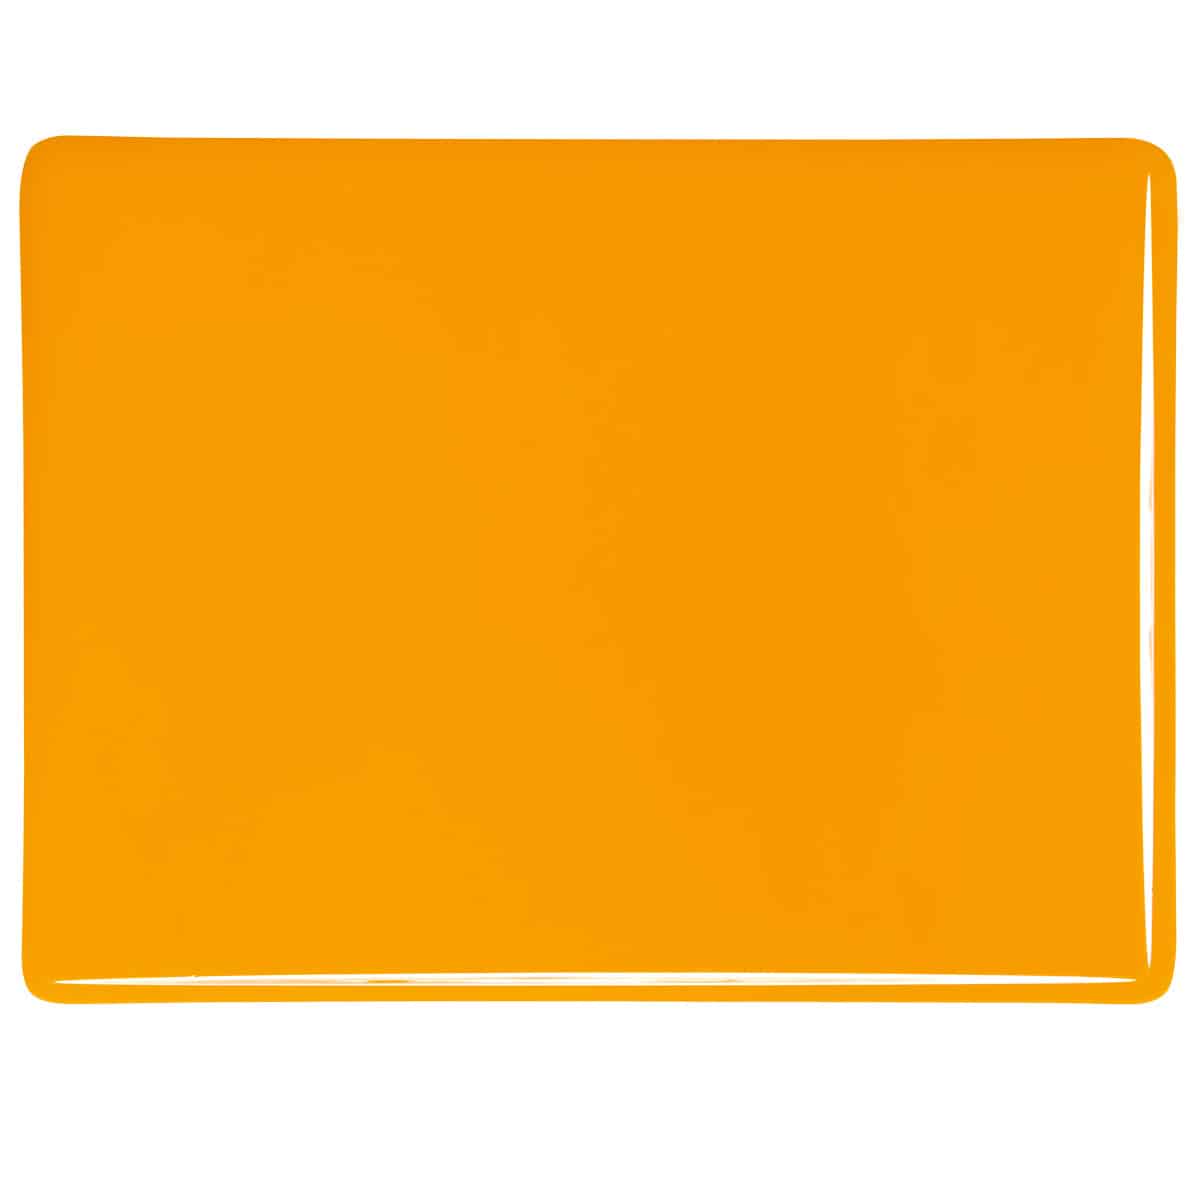 000320 Marigold Yellow Opalescent